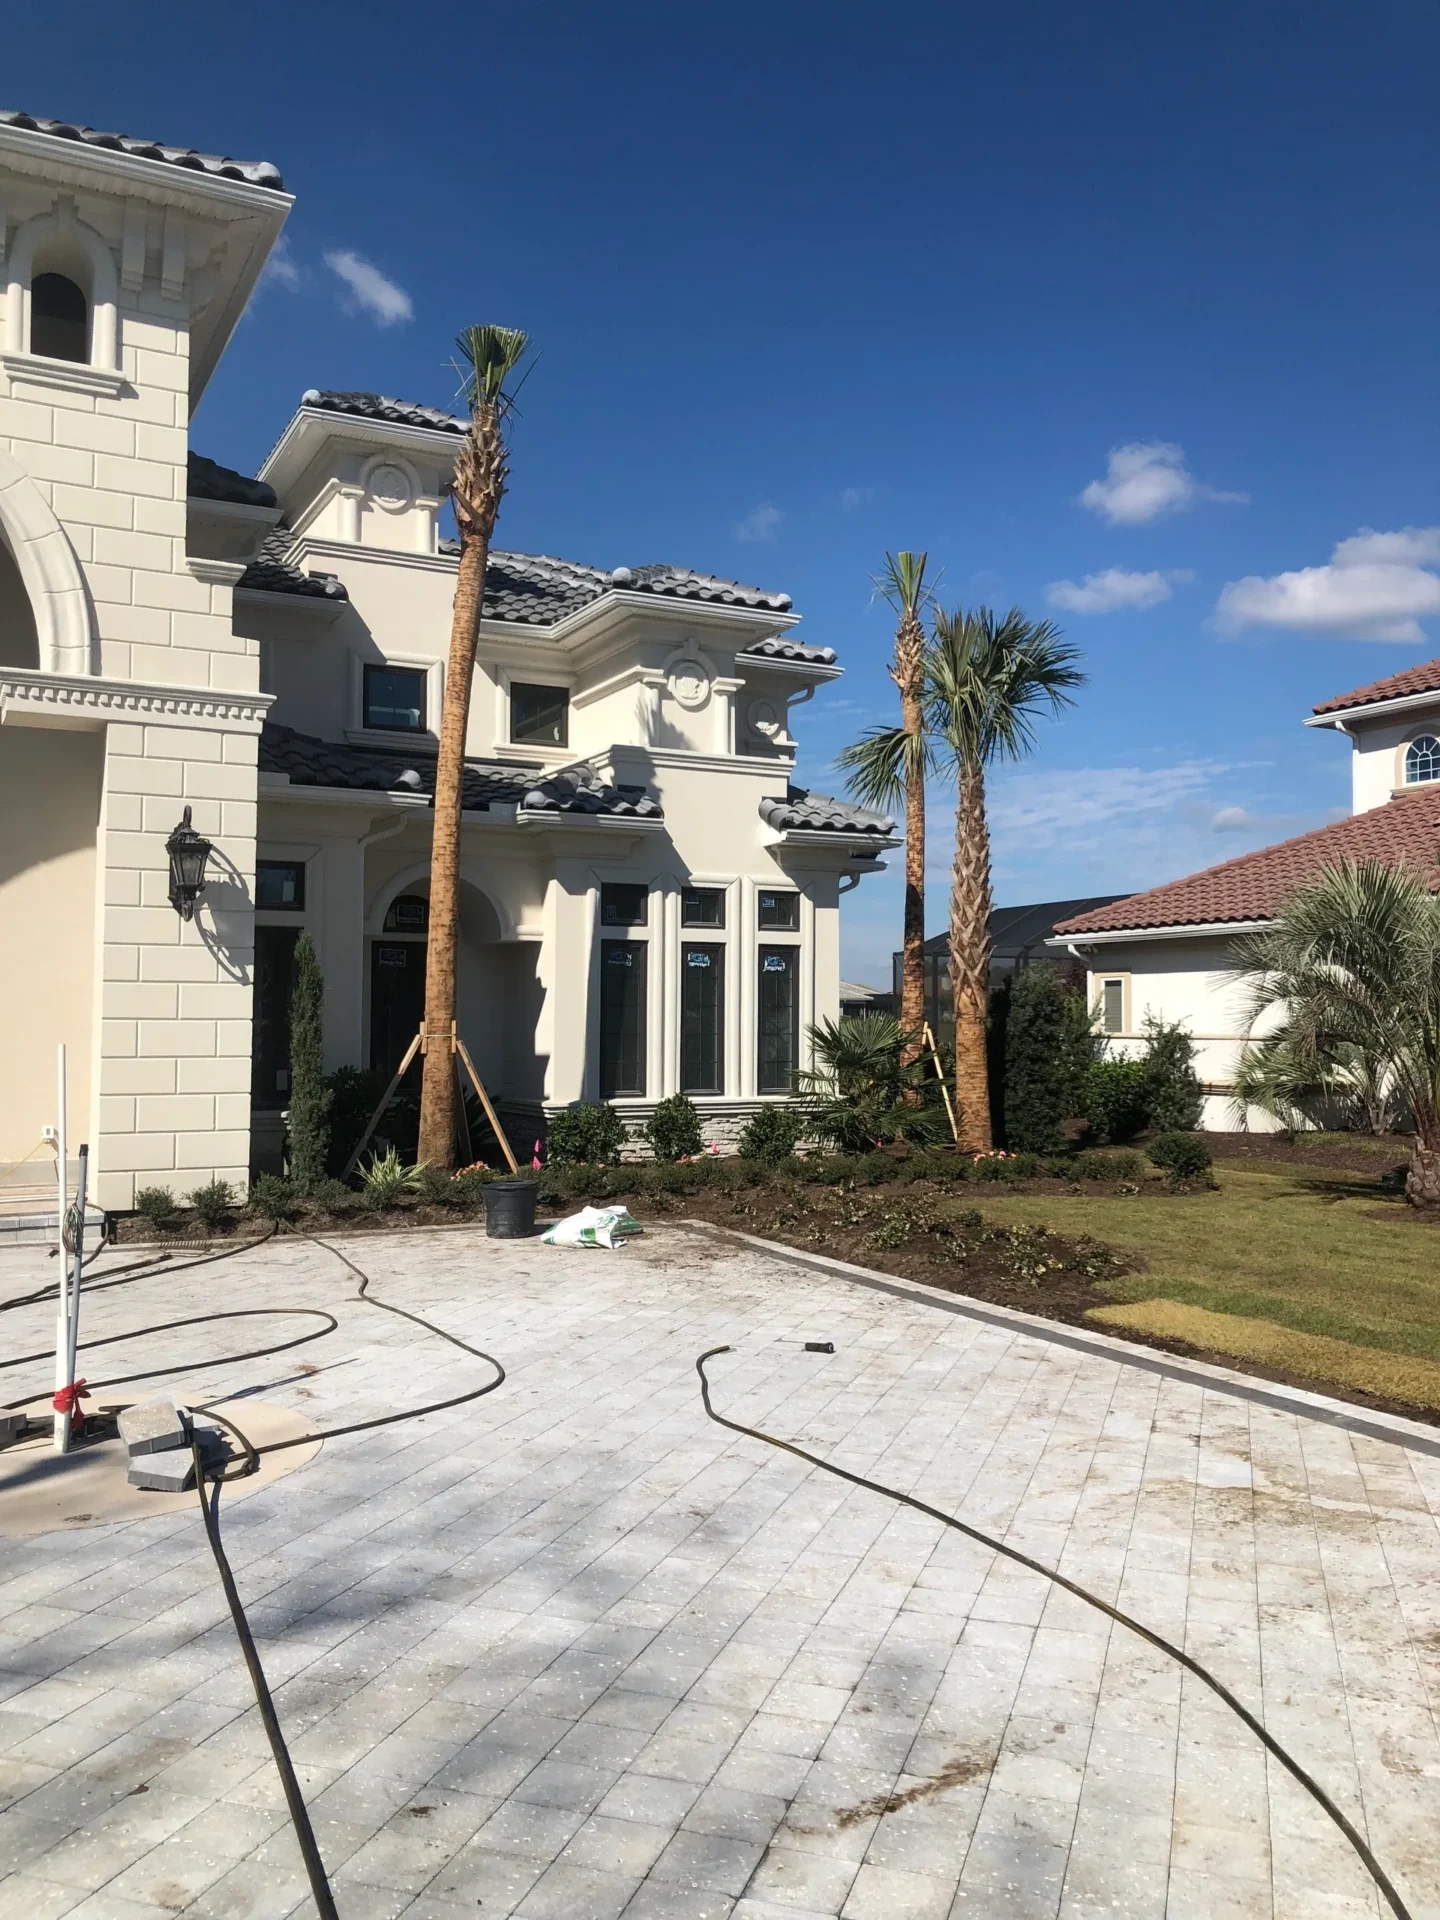 A large white house with palm trees and a power washer.